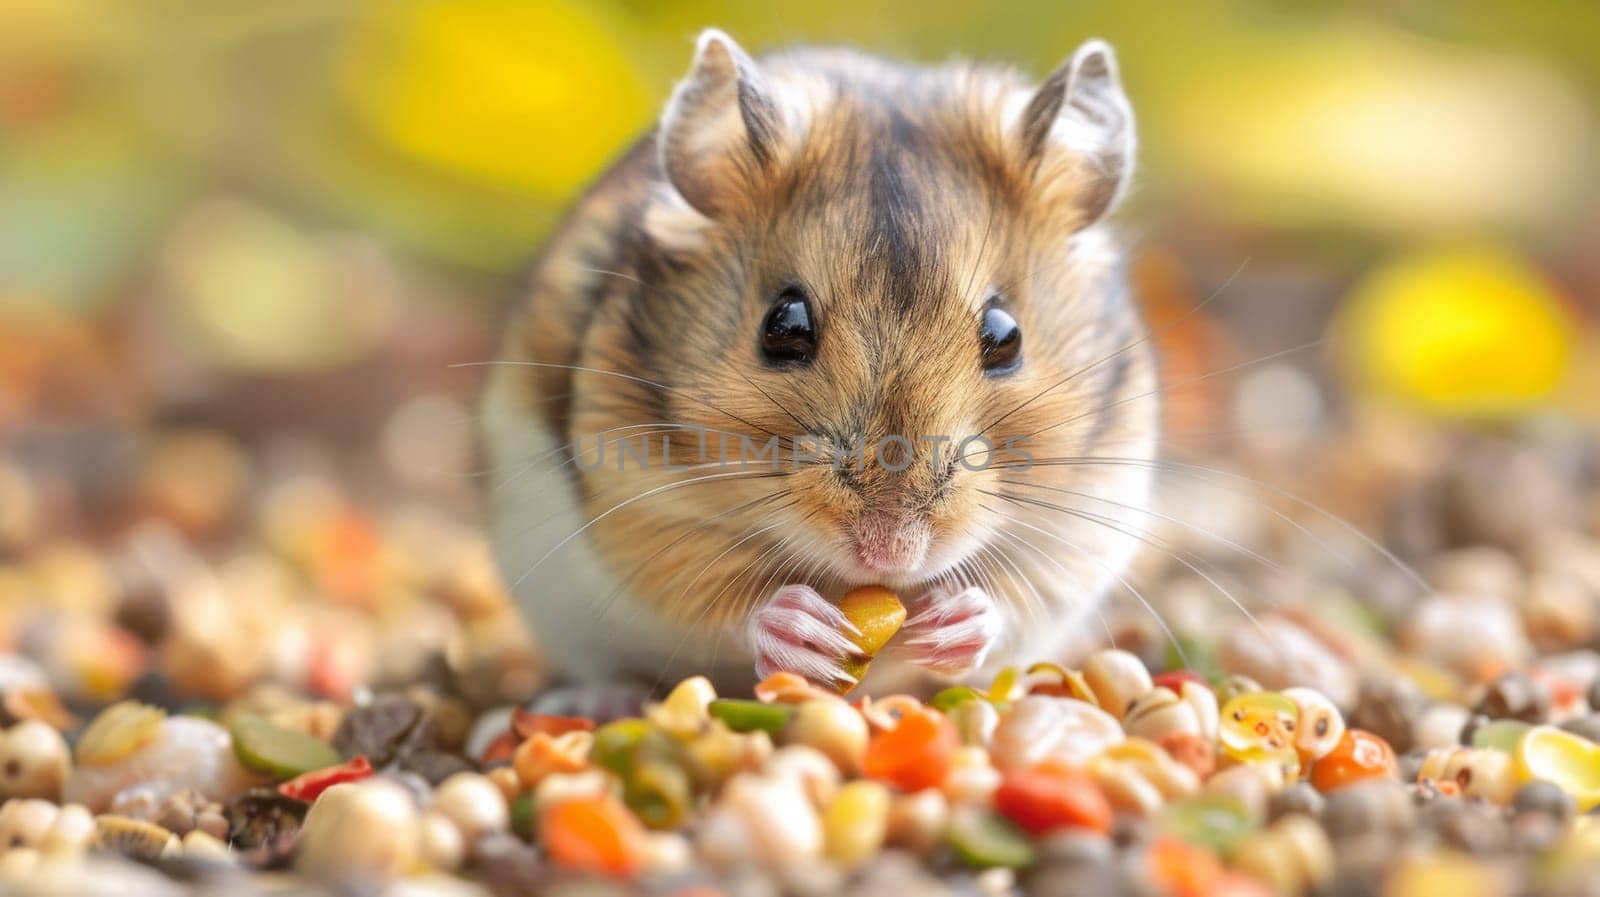 A small brown and white hamster eating food from a bowl